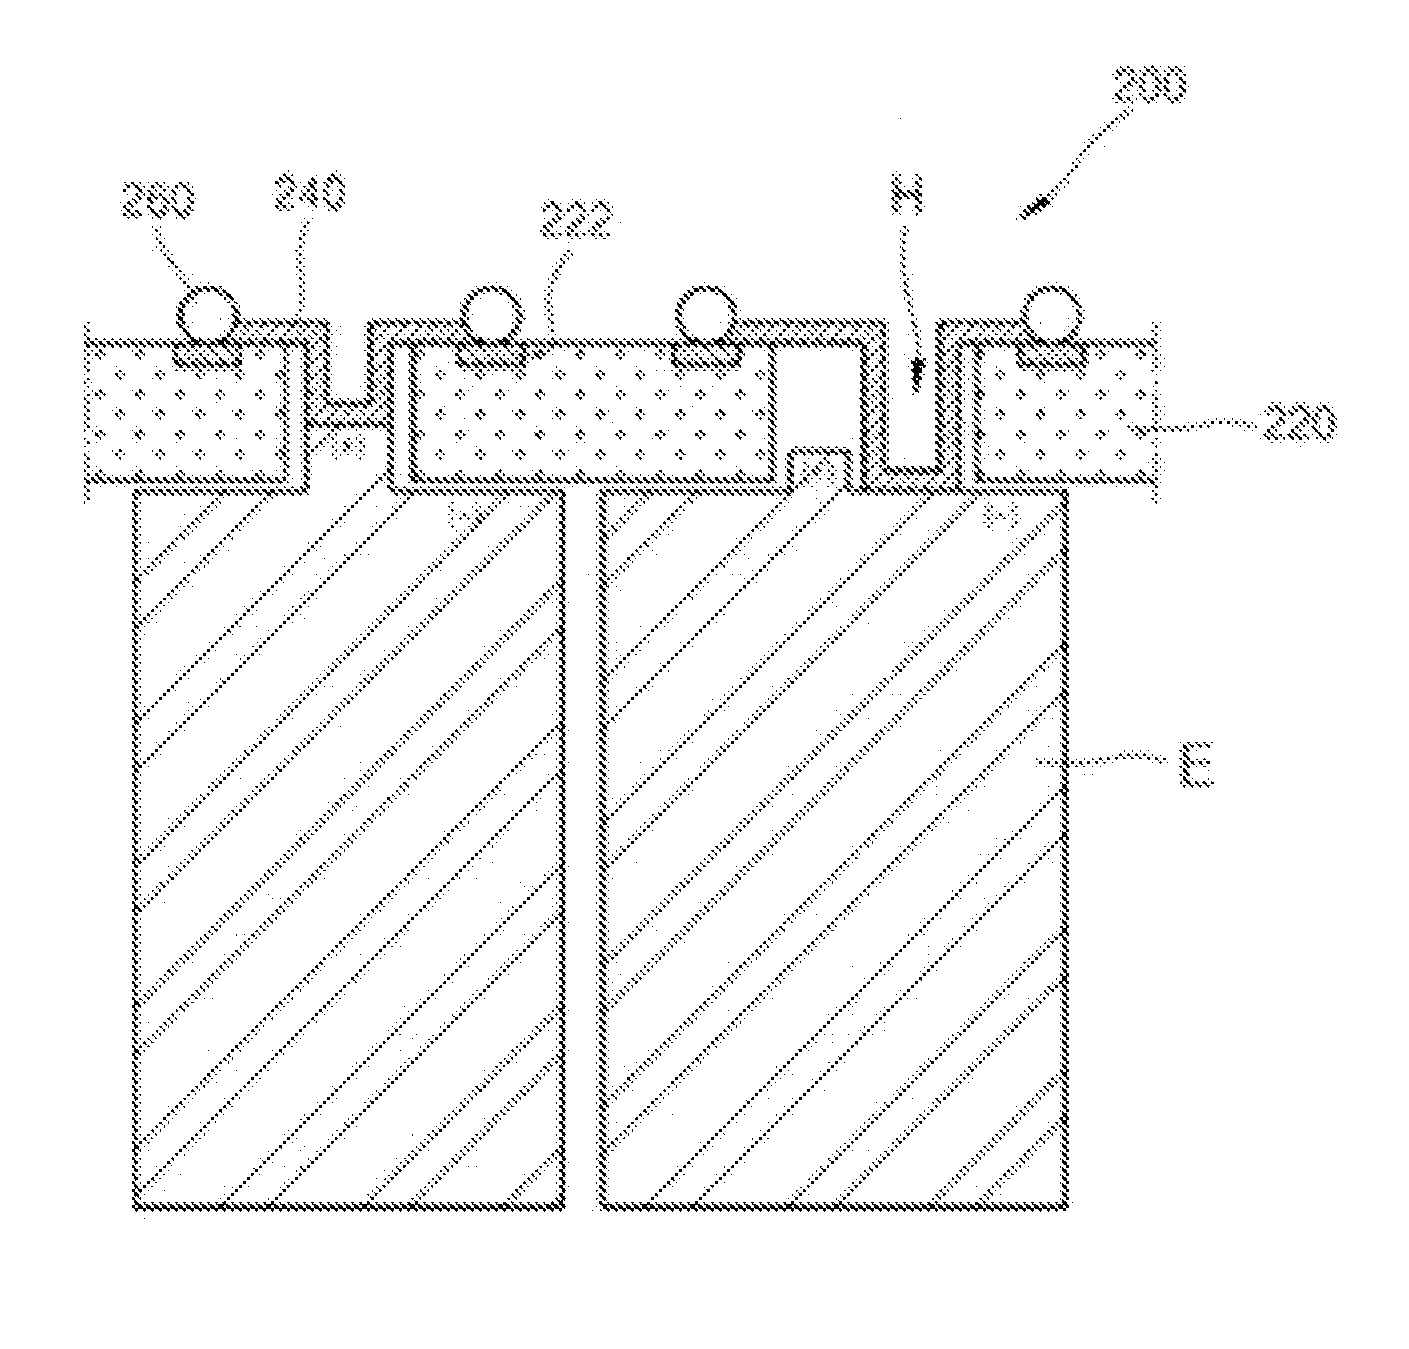 Battery assembly using printed circuit board substrate including bus bar